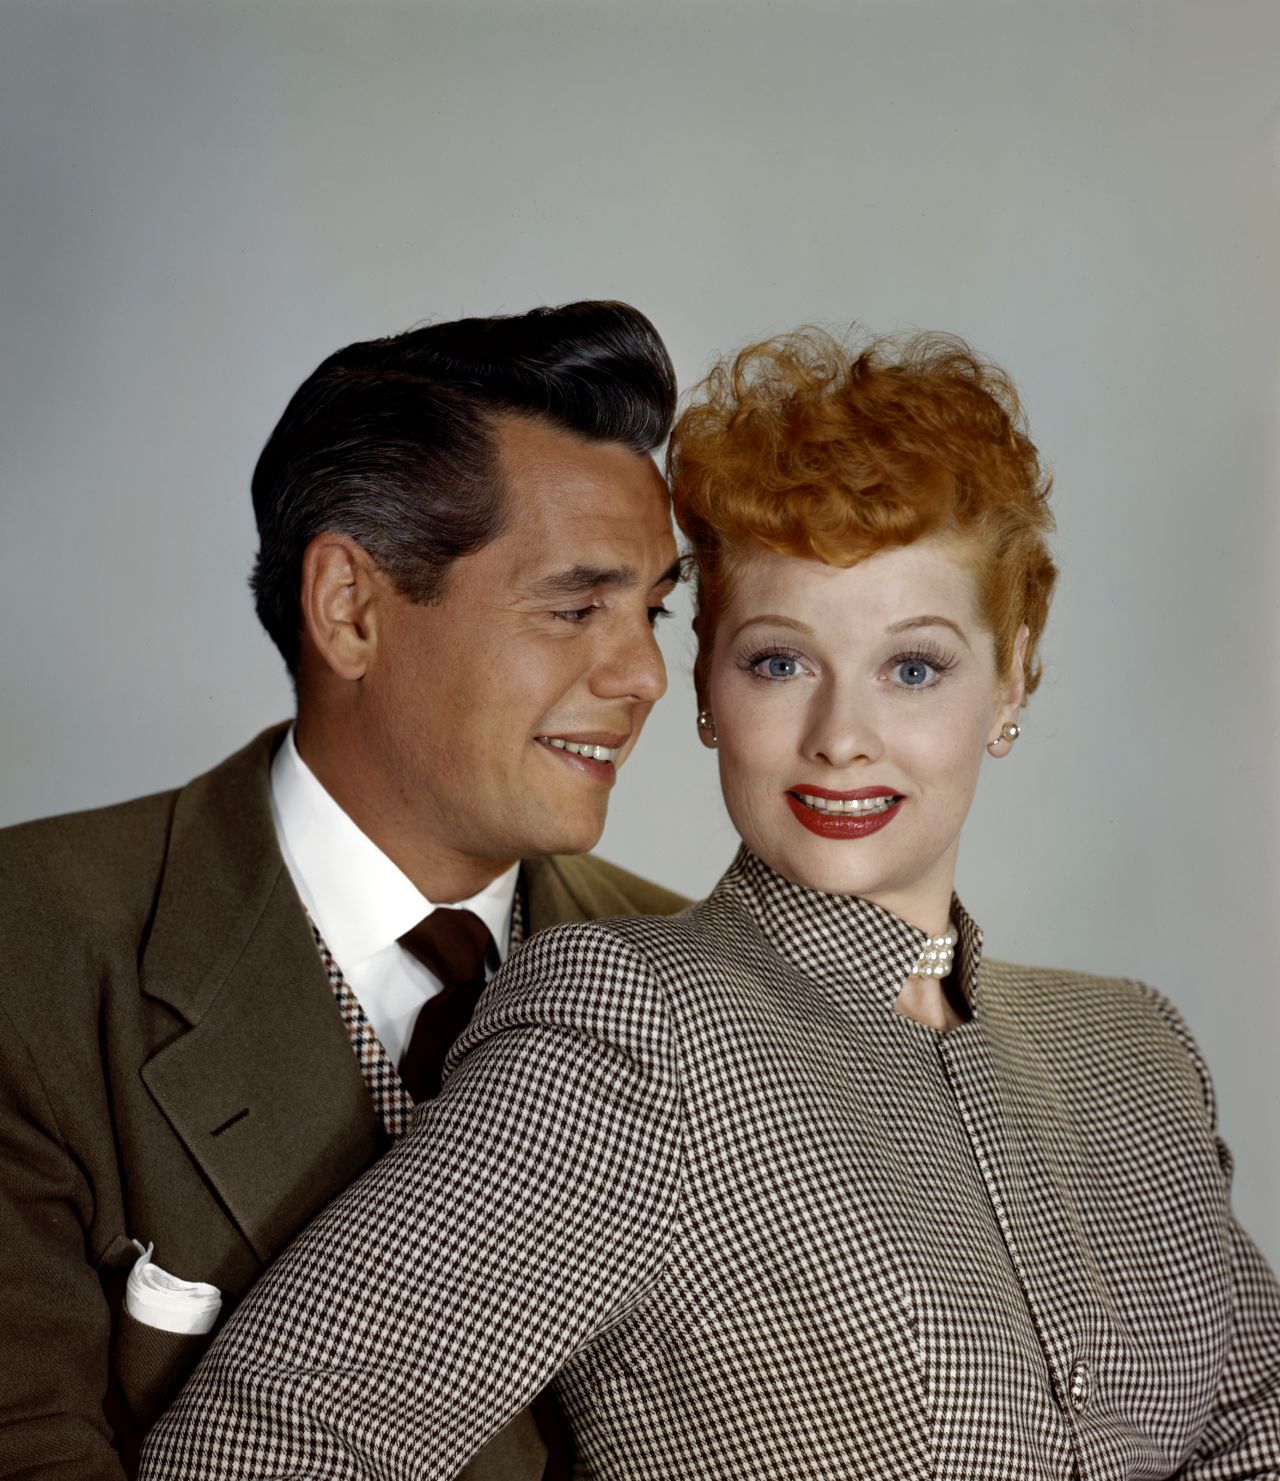 Actress Lucille Ball and her husband, actor Desi Arnaz, were two of the stars of the hit television series "I Love Lucy." The black-and-white show premiered on October 15, 1951, and ran until 1957. It was the most watched show for four of its six seasons.